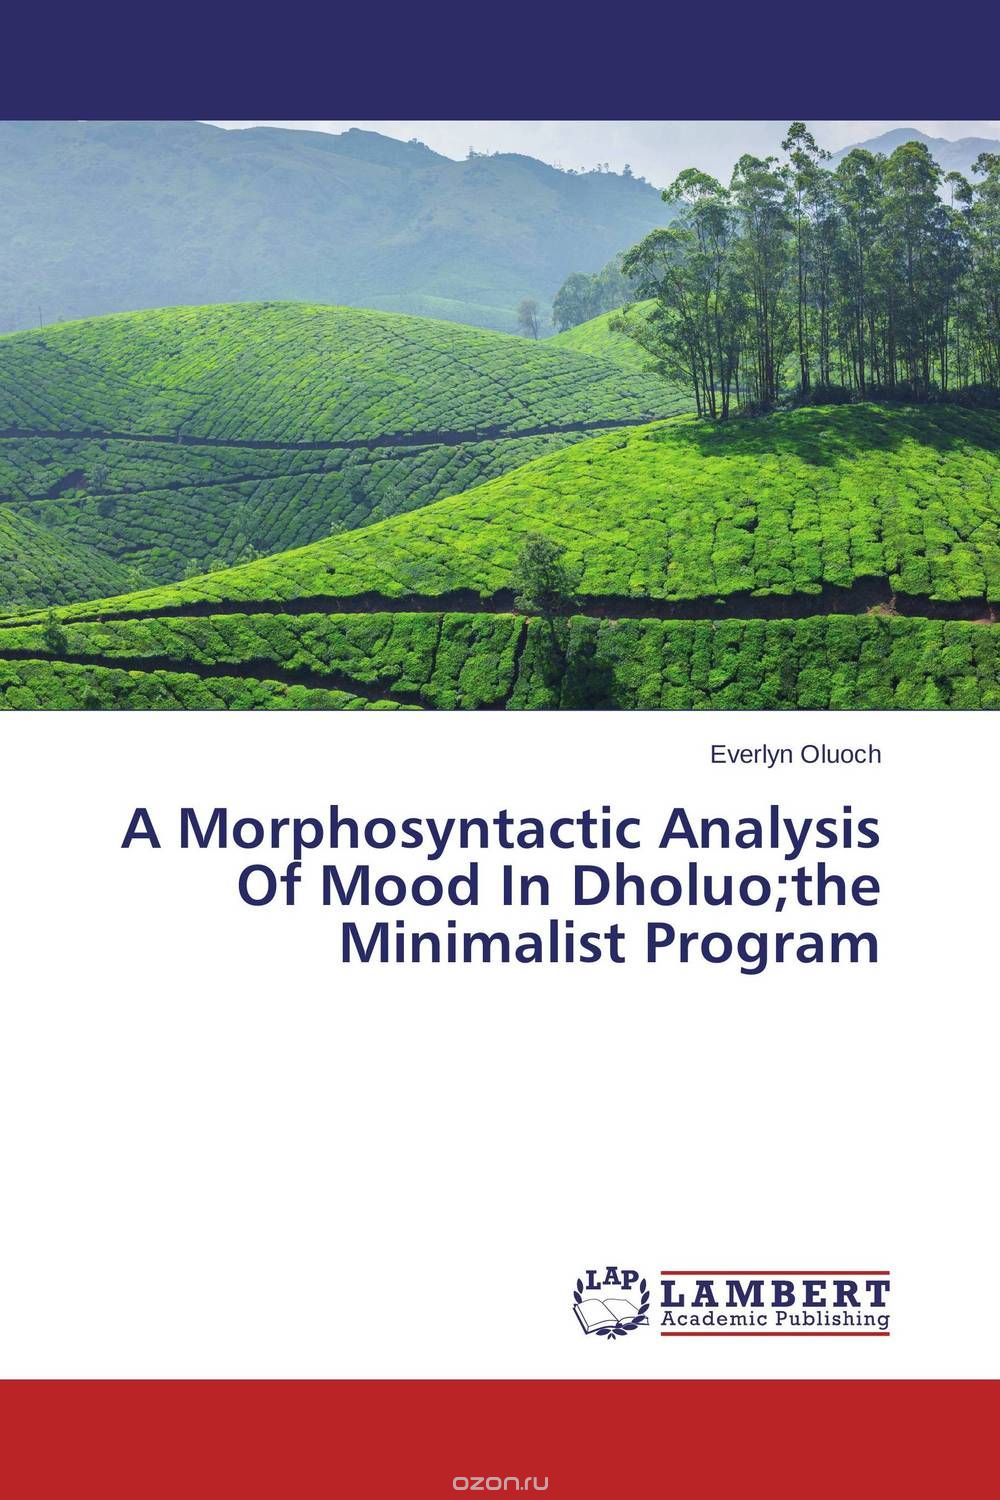 A Morphosyntactic Analysis Of Mood In Dholuo;the Minimalist Program